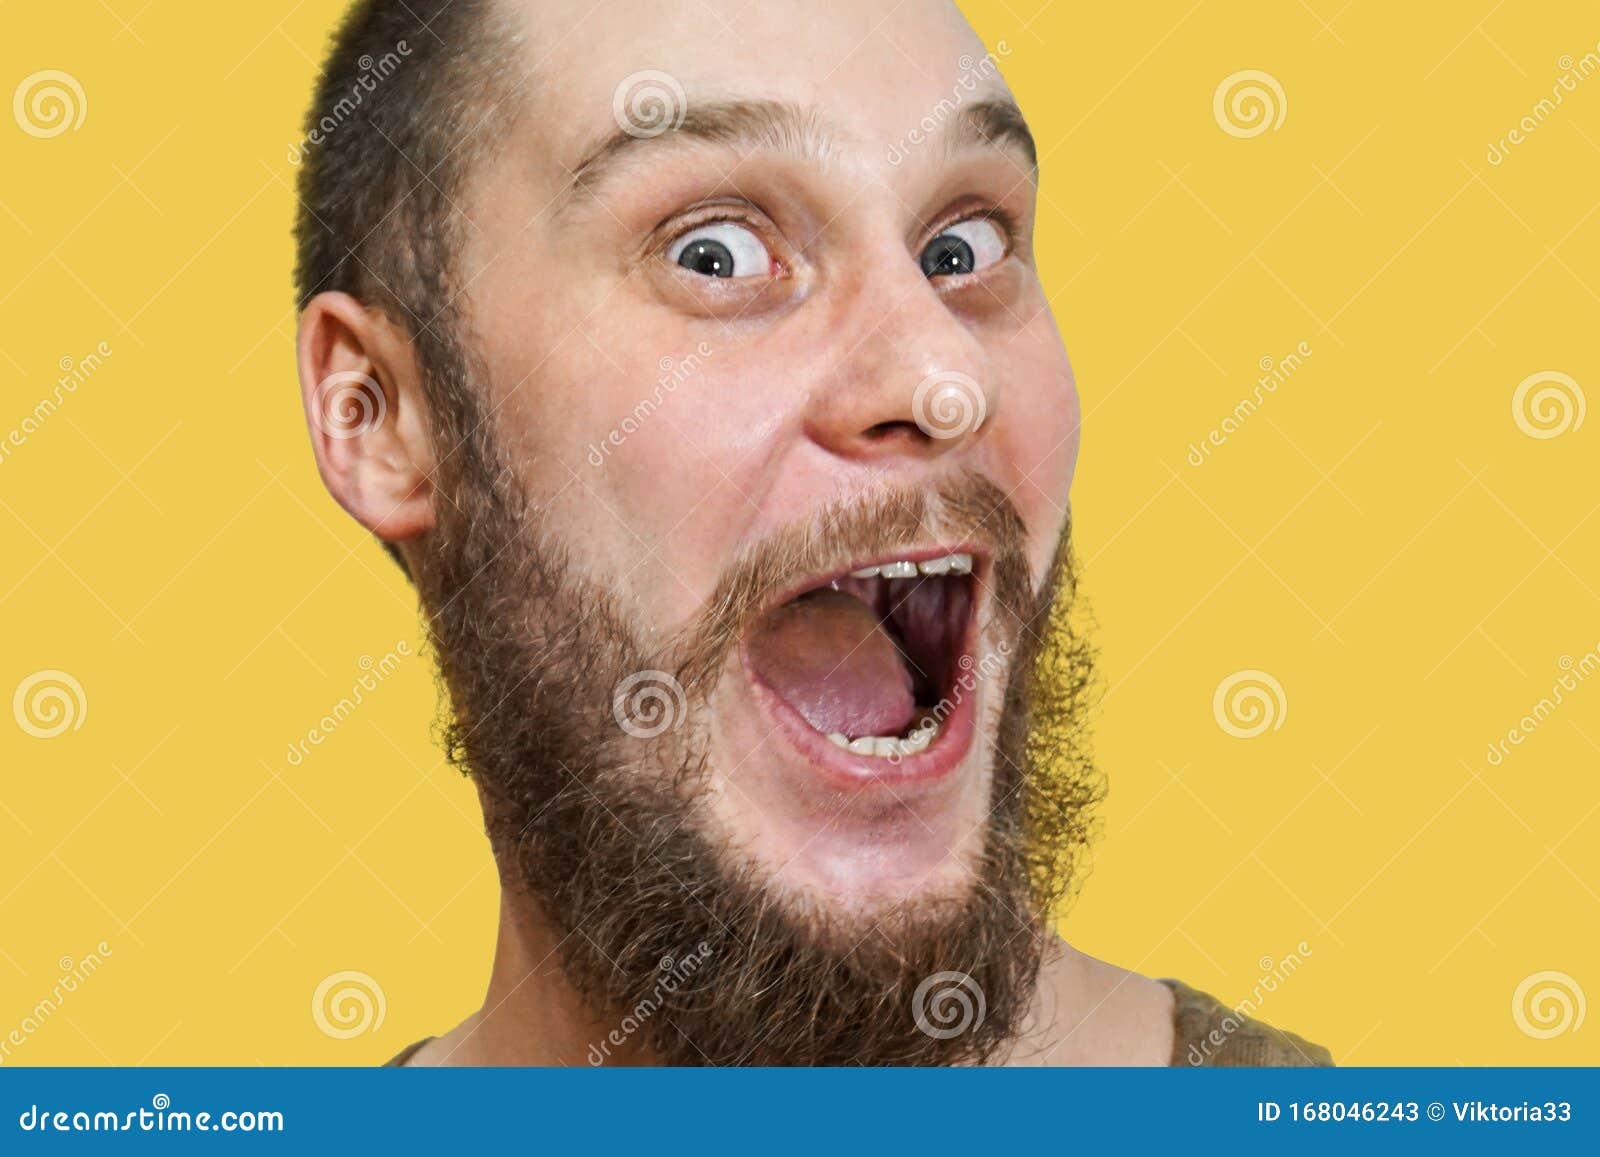 Very Surprised Scared Funny Face of a Bearded Guy with Open Mouth and Big  Eyes on an Isolated Background Stock Image - Image of eyes, male: 168046243